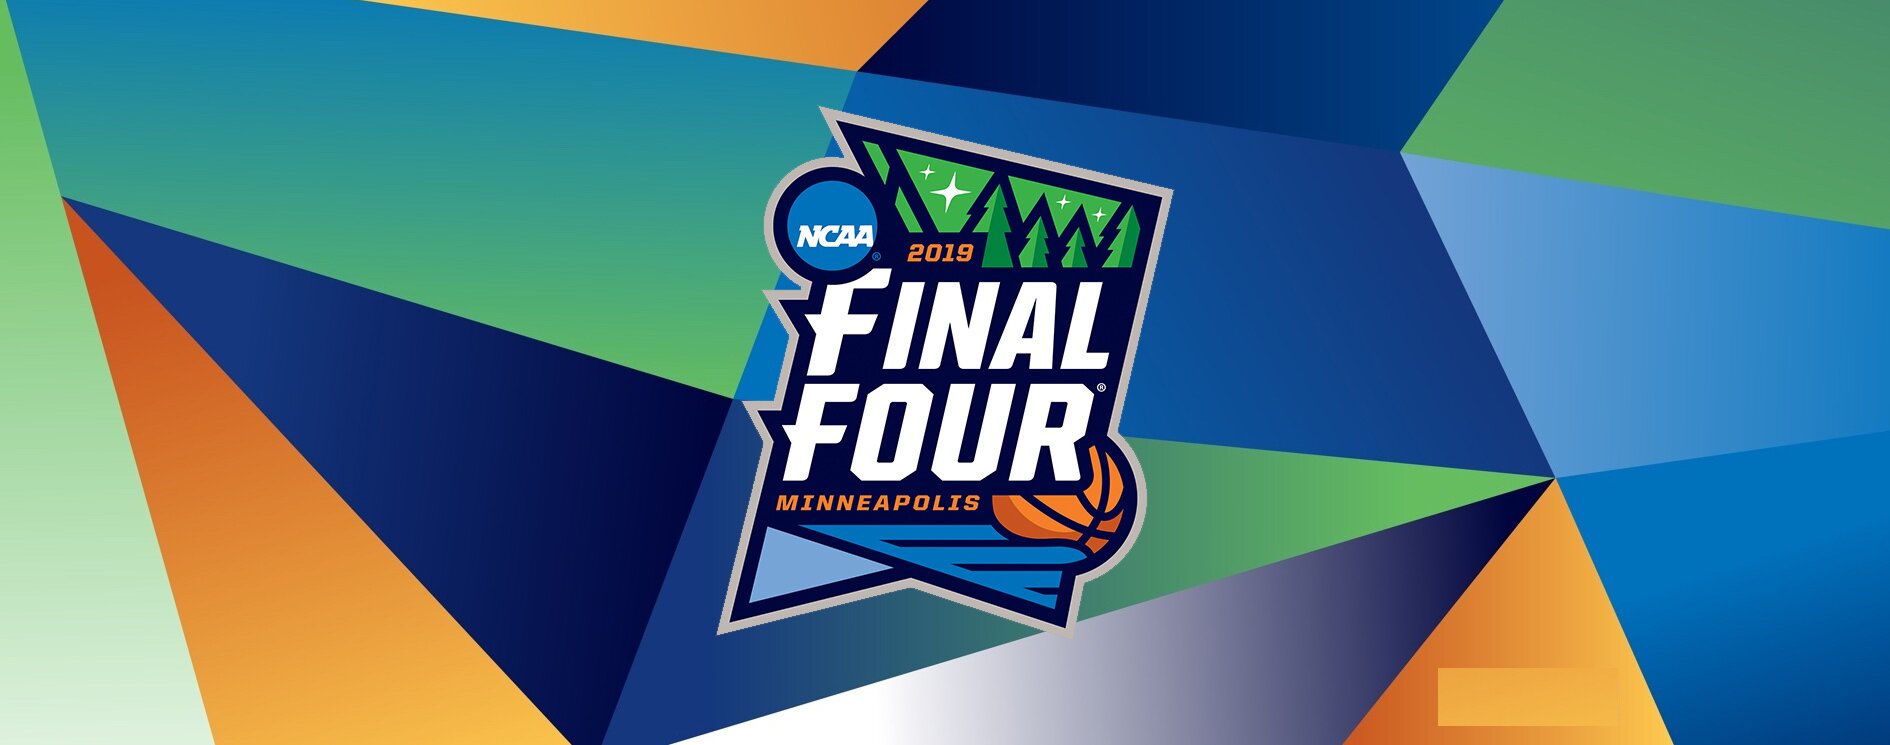 Final Four 2019 Betting Odds & Preview